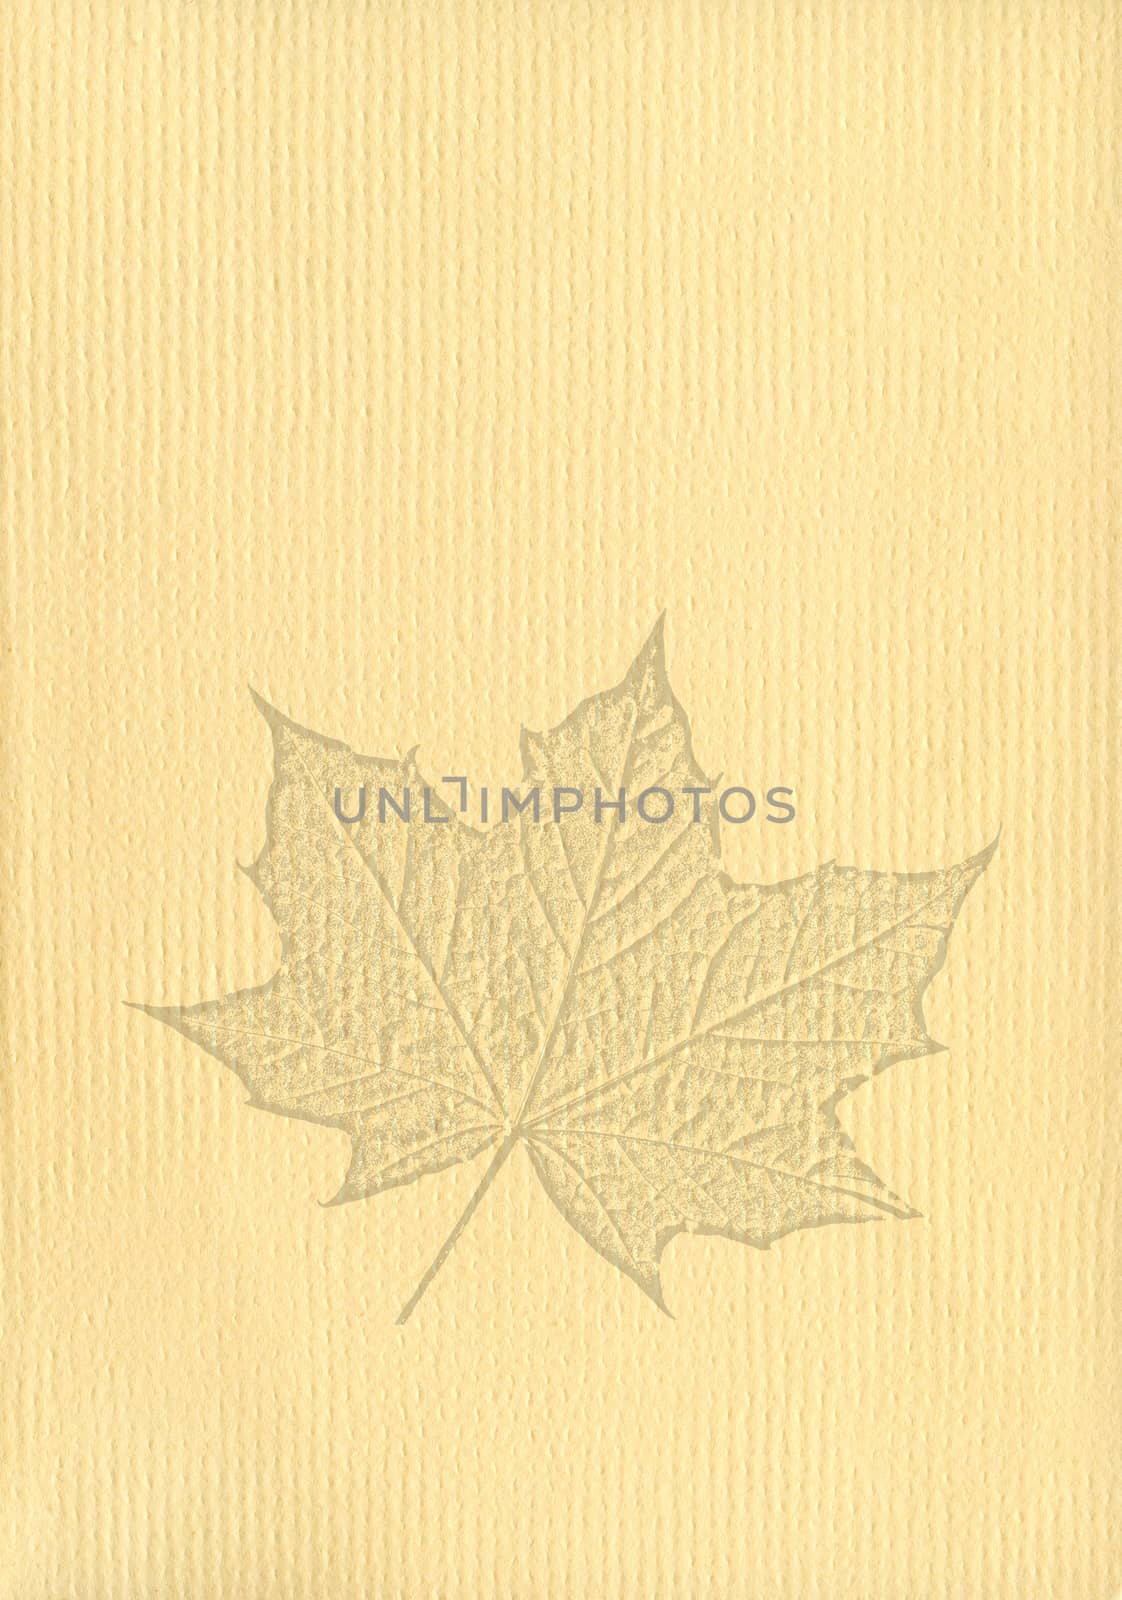 Notepaper document texture background with a cut out isolated maple leaf watermark